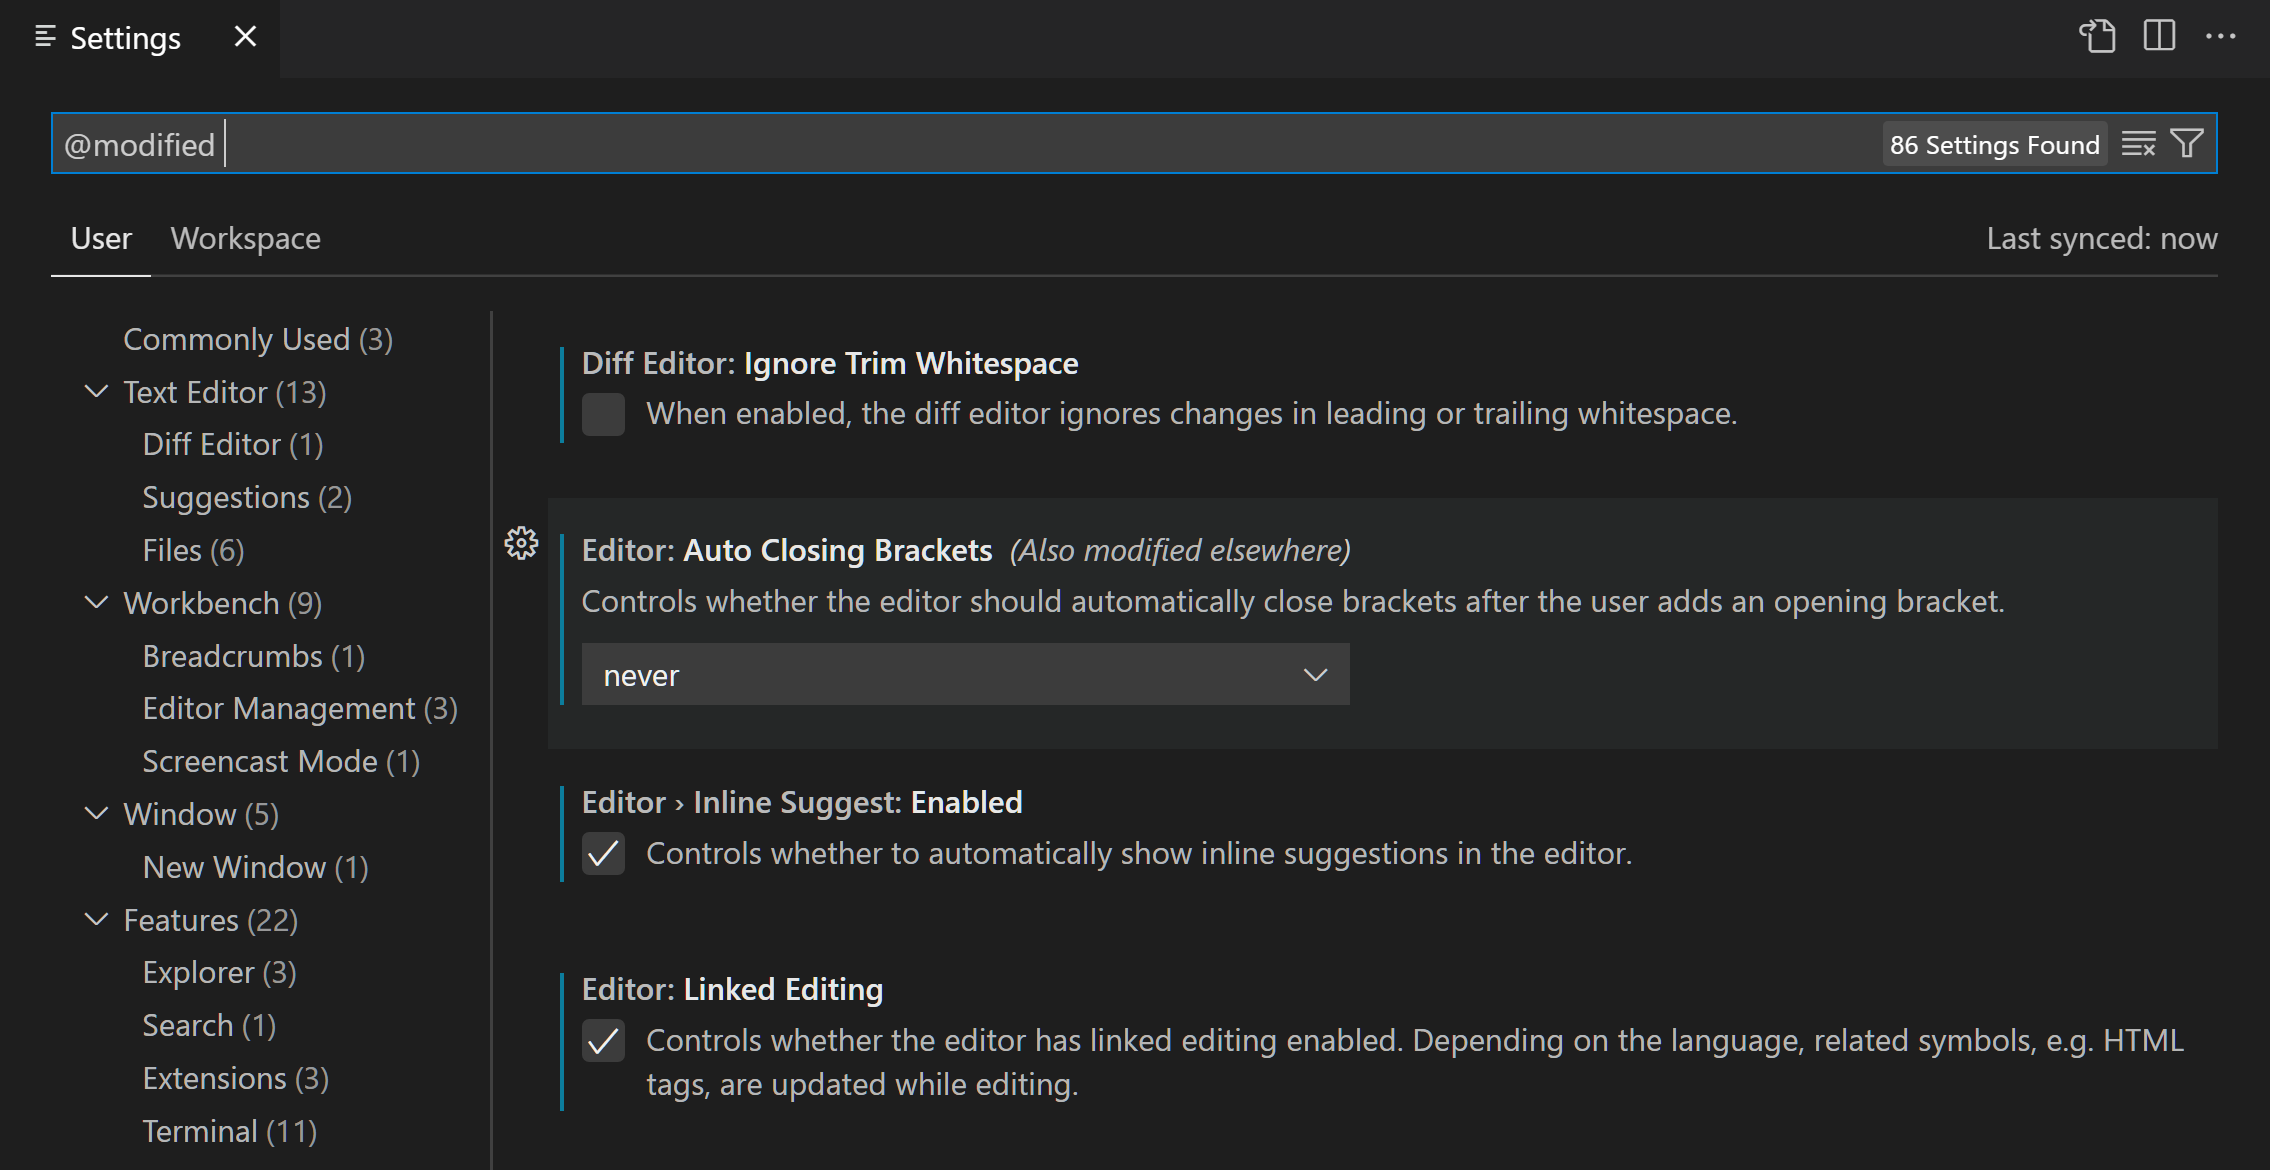 Settings editor with @modified filter showing changed settings